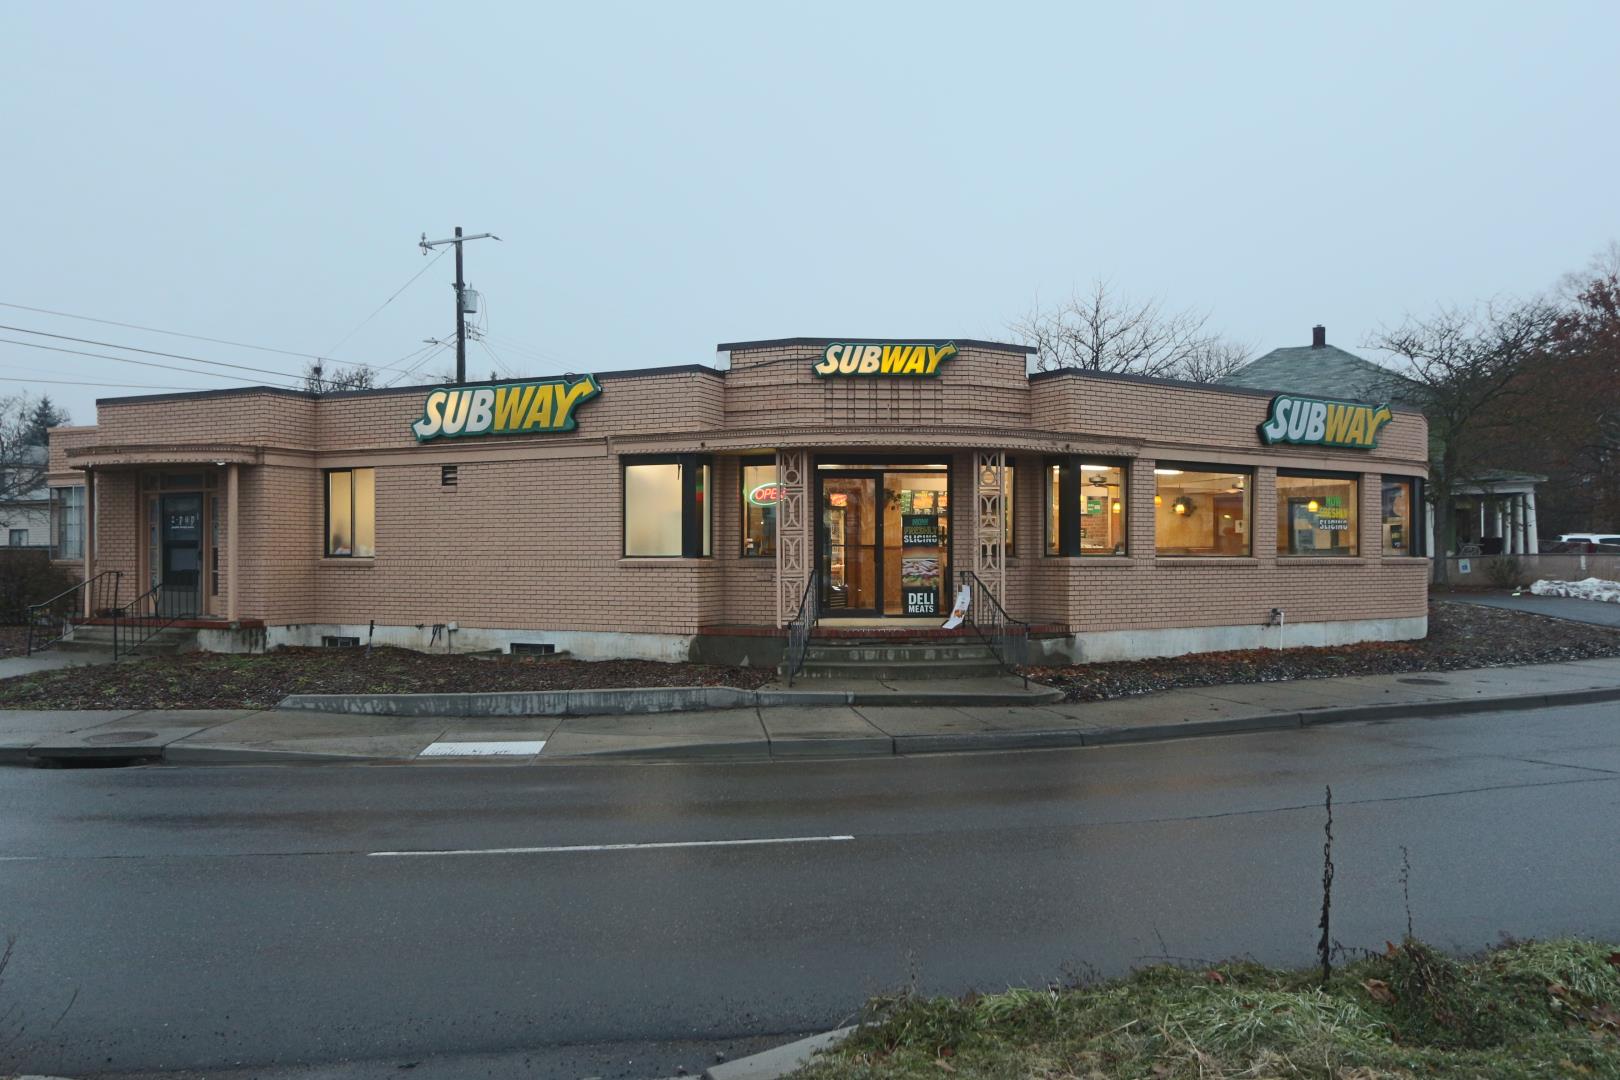 Current use is a Subway Restaurant. Brick building on corner lot. 12 surface car park spaces. All furnishing and equipment included at no additional value. Nearly half of building is un-occupied plus a partial basement. Zoning is CB-55. 19,800 historic traffic count. Priced well under assessed value of $454,300. Assessor shows 2,705 sqft on main level.